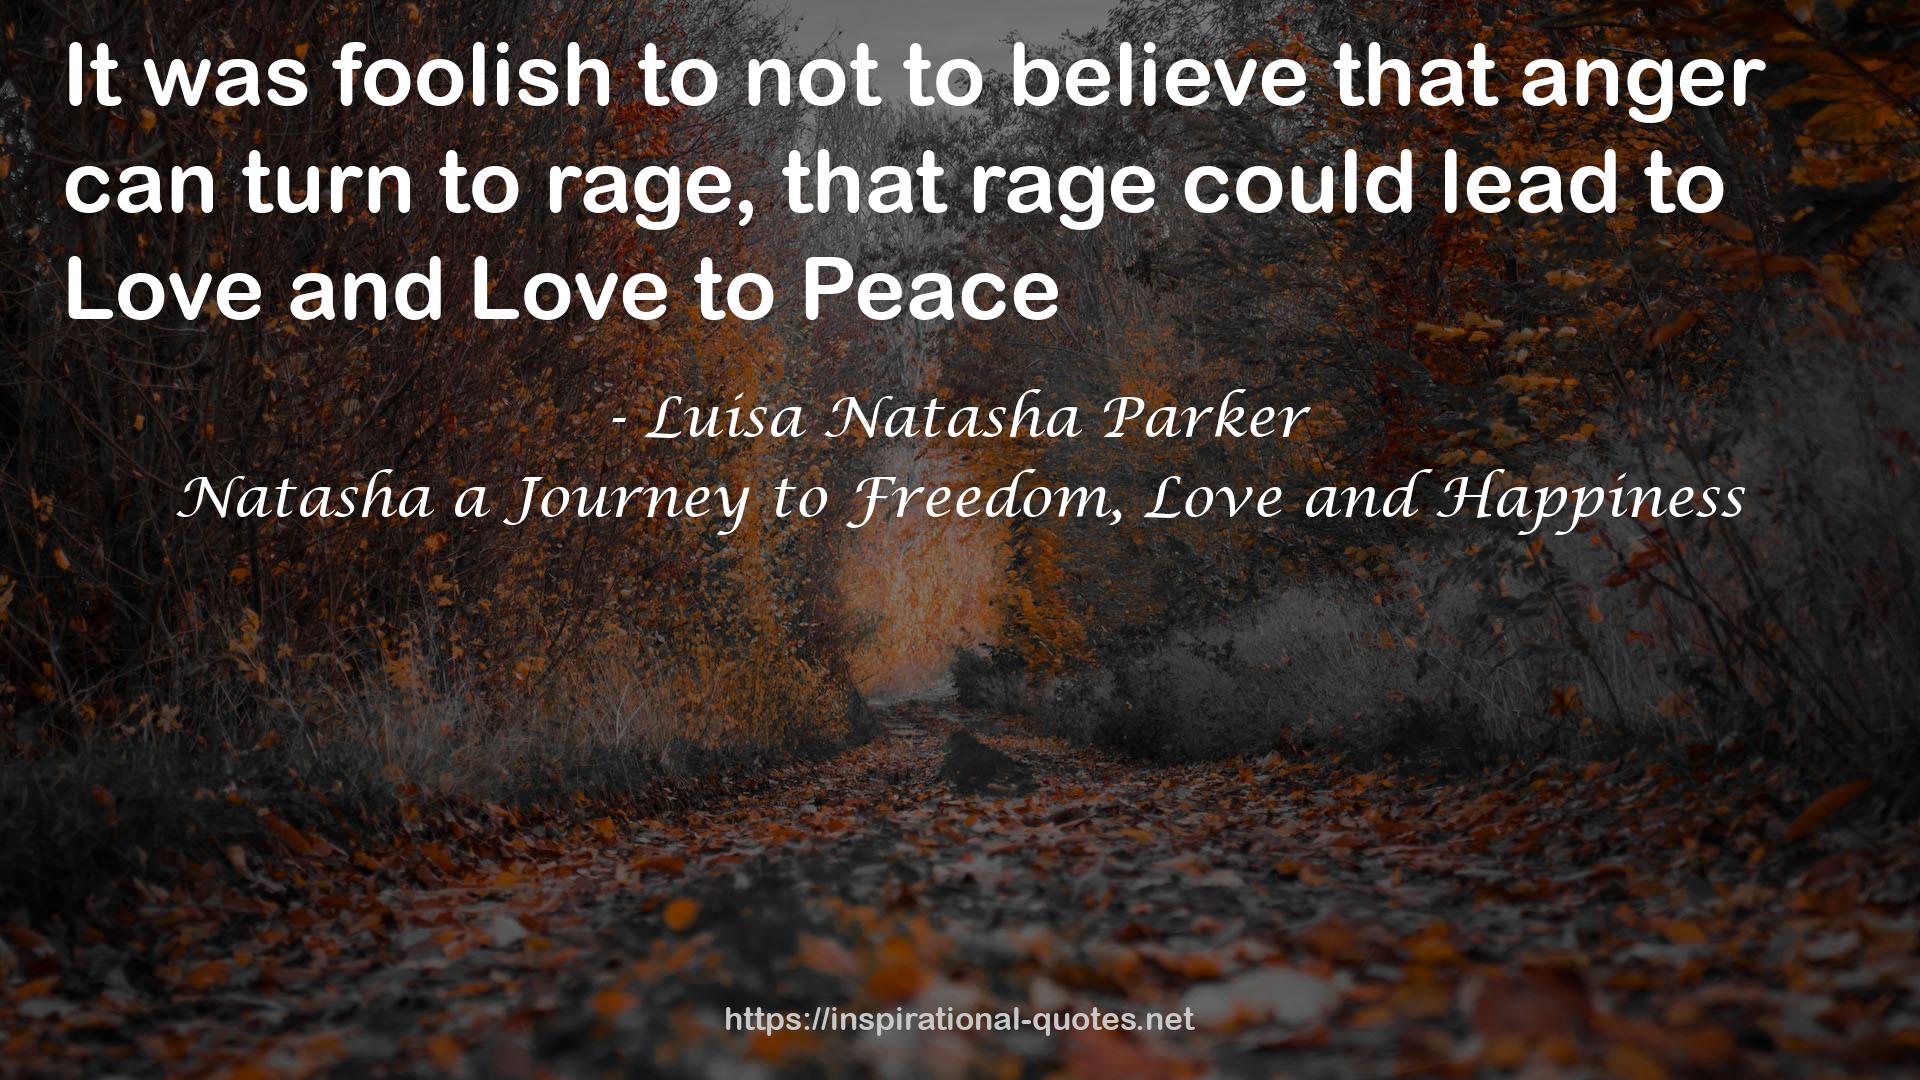 Natasha a Journey to Freedom, Love and Happiness QUOTES